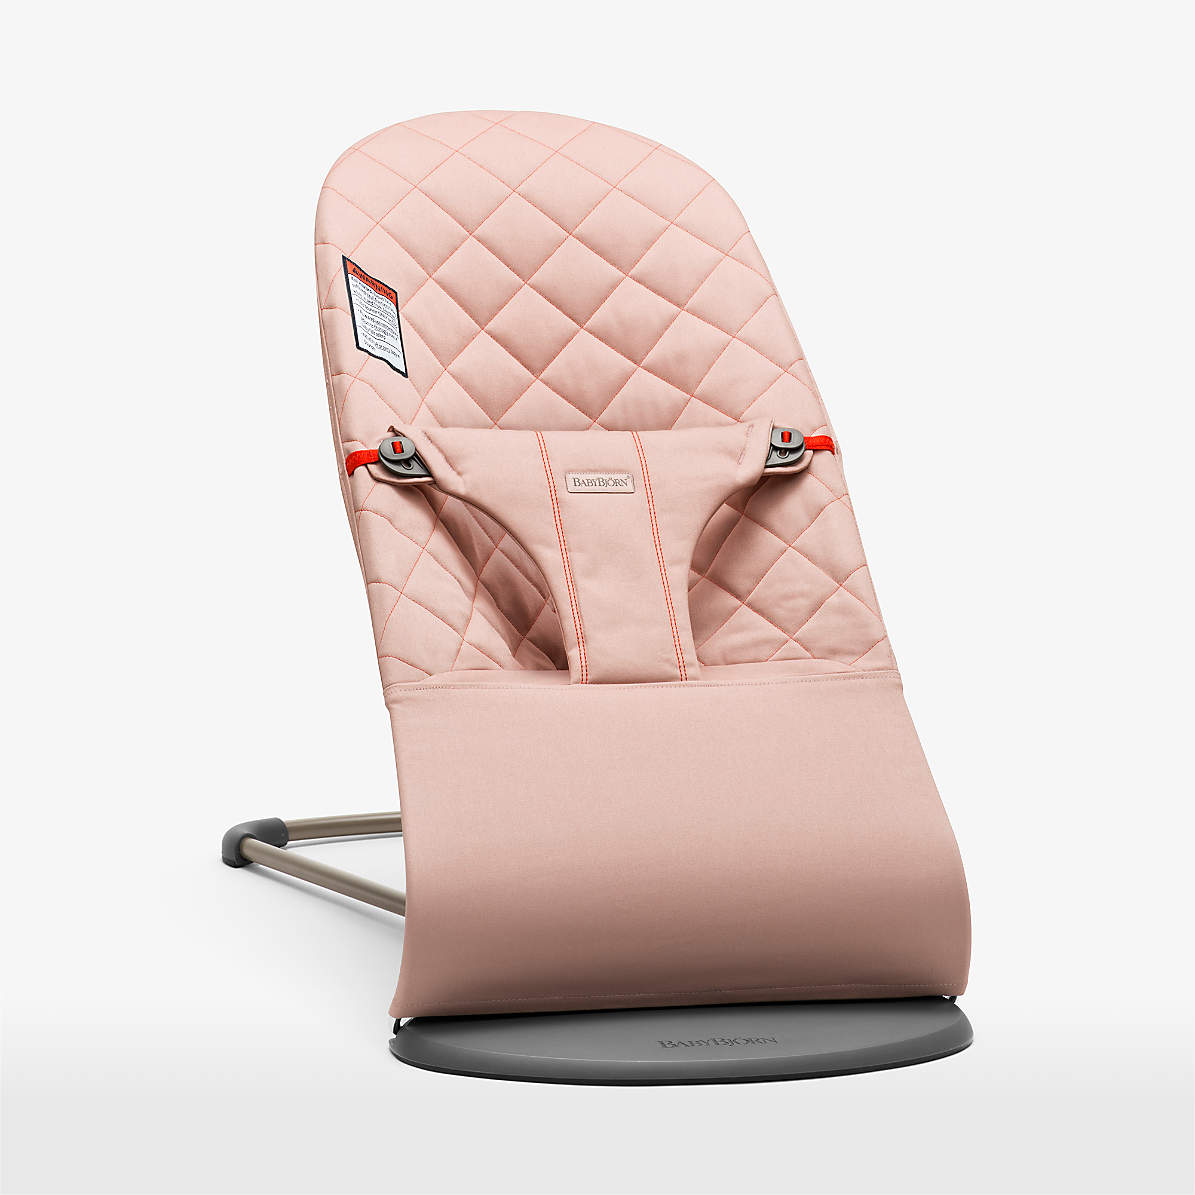 BABY BJÖRN Bouncer Bliss Cotton Quilt Dusty Pink Infant Bouncer Chair +  Reviews